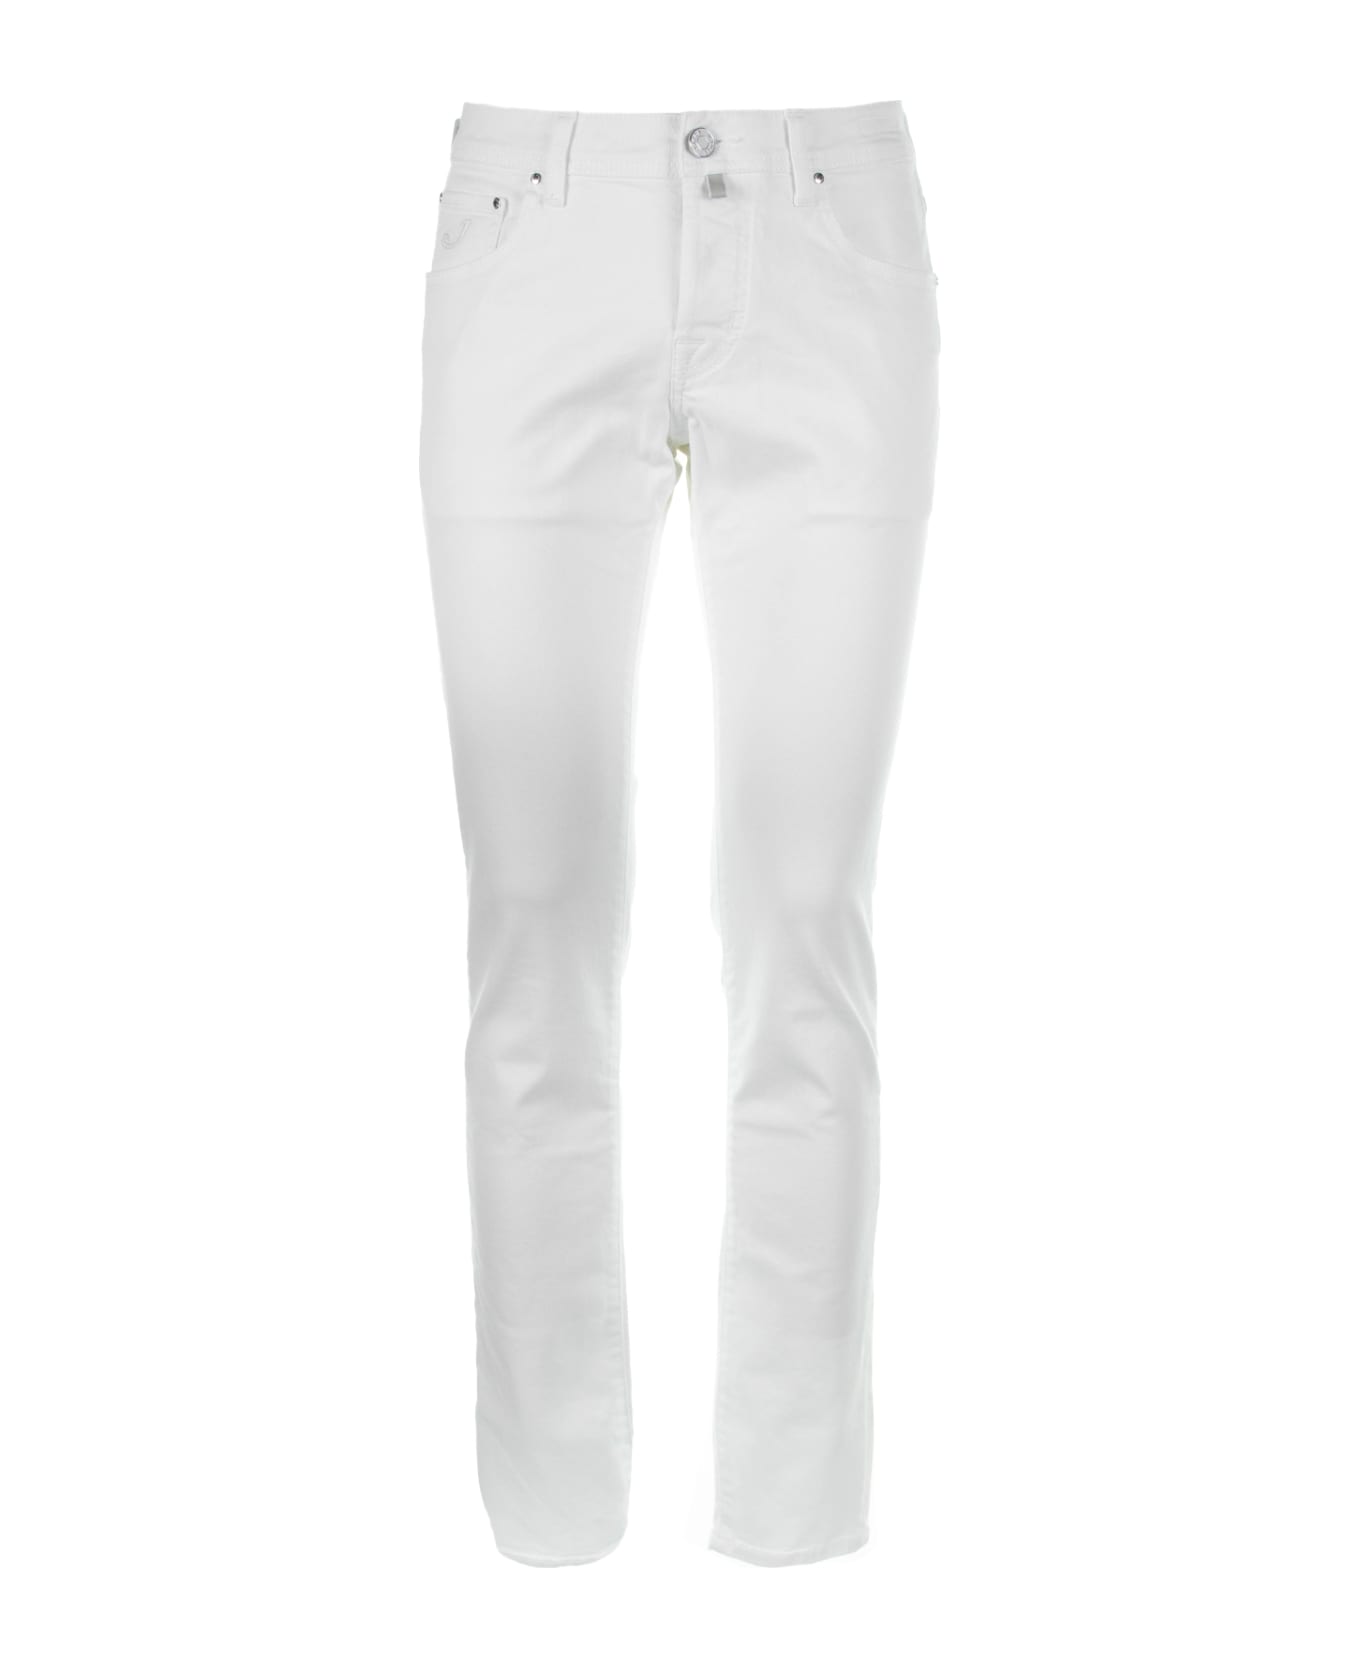 Jacob Cohen White 5-pocket Trousers In Cotton - BIANCO ボトムス